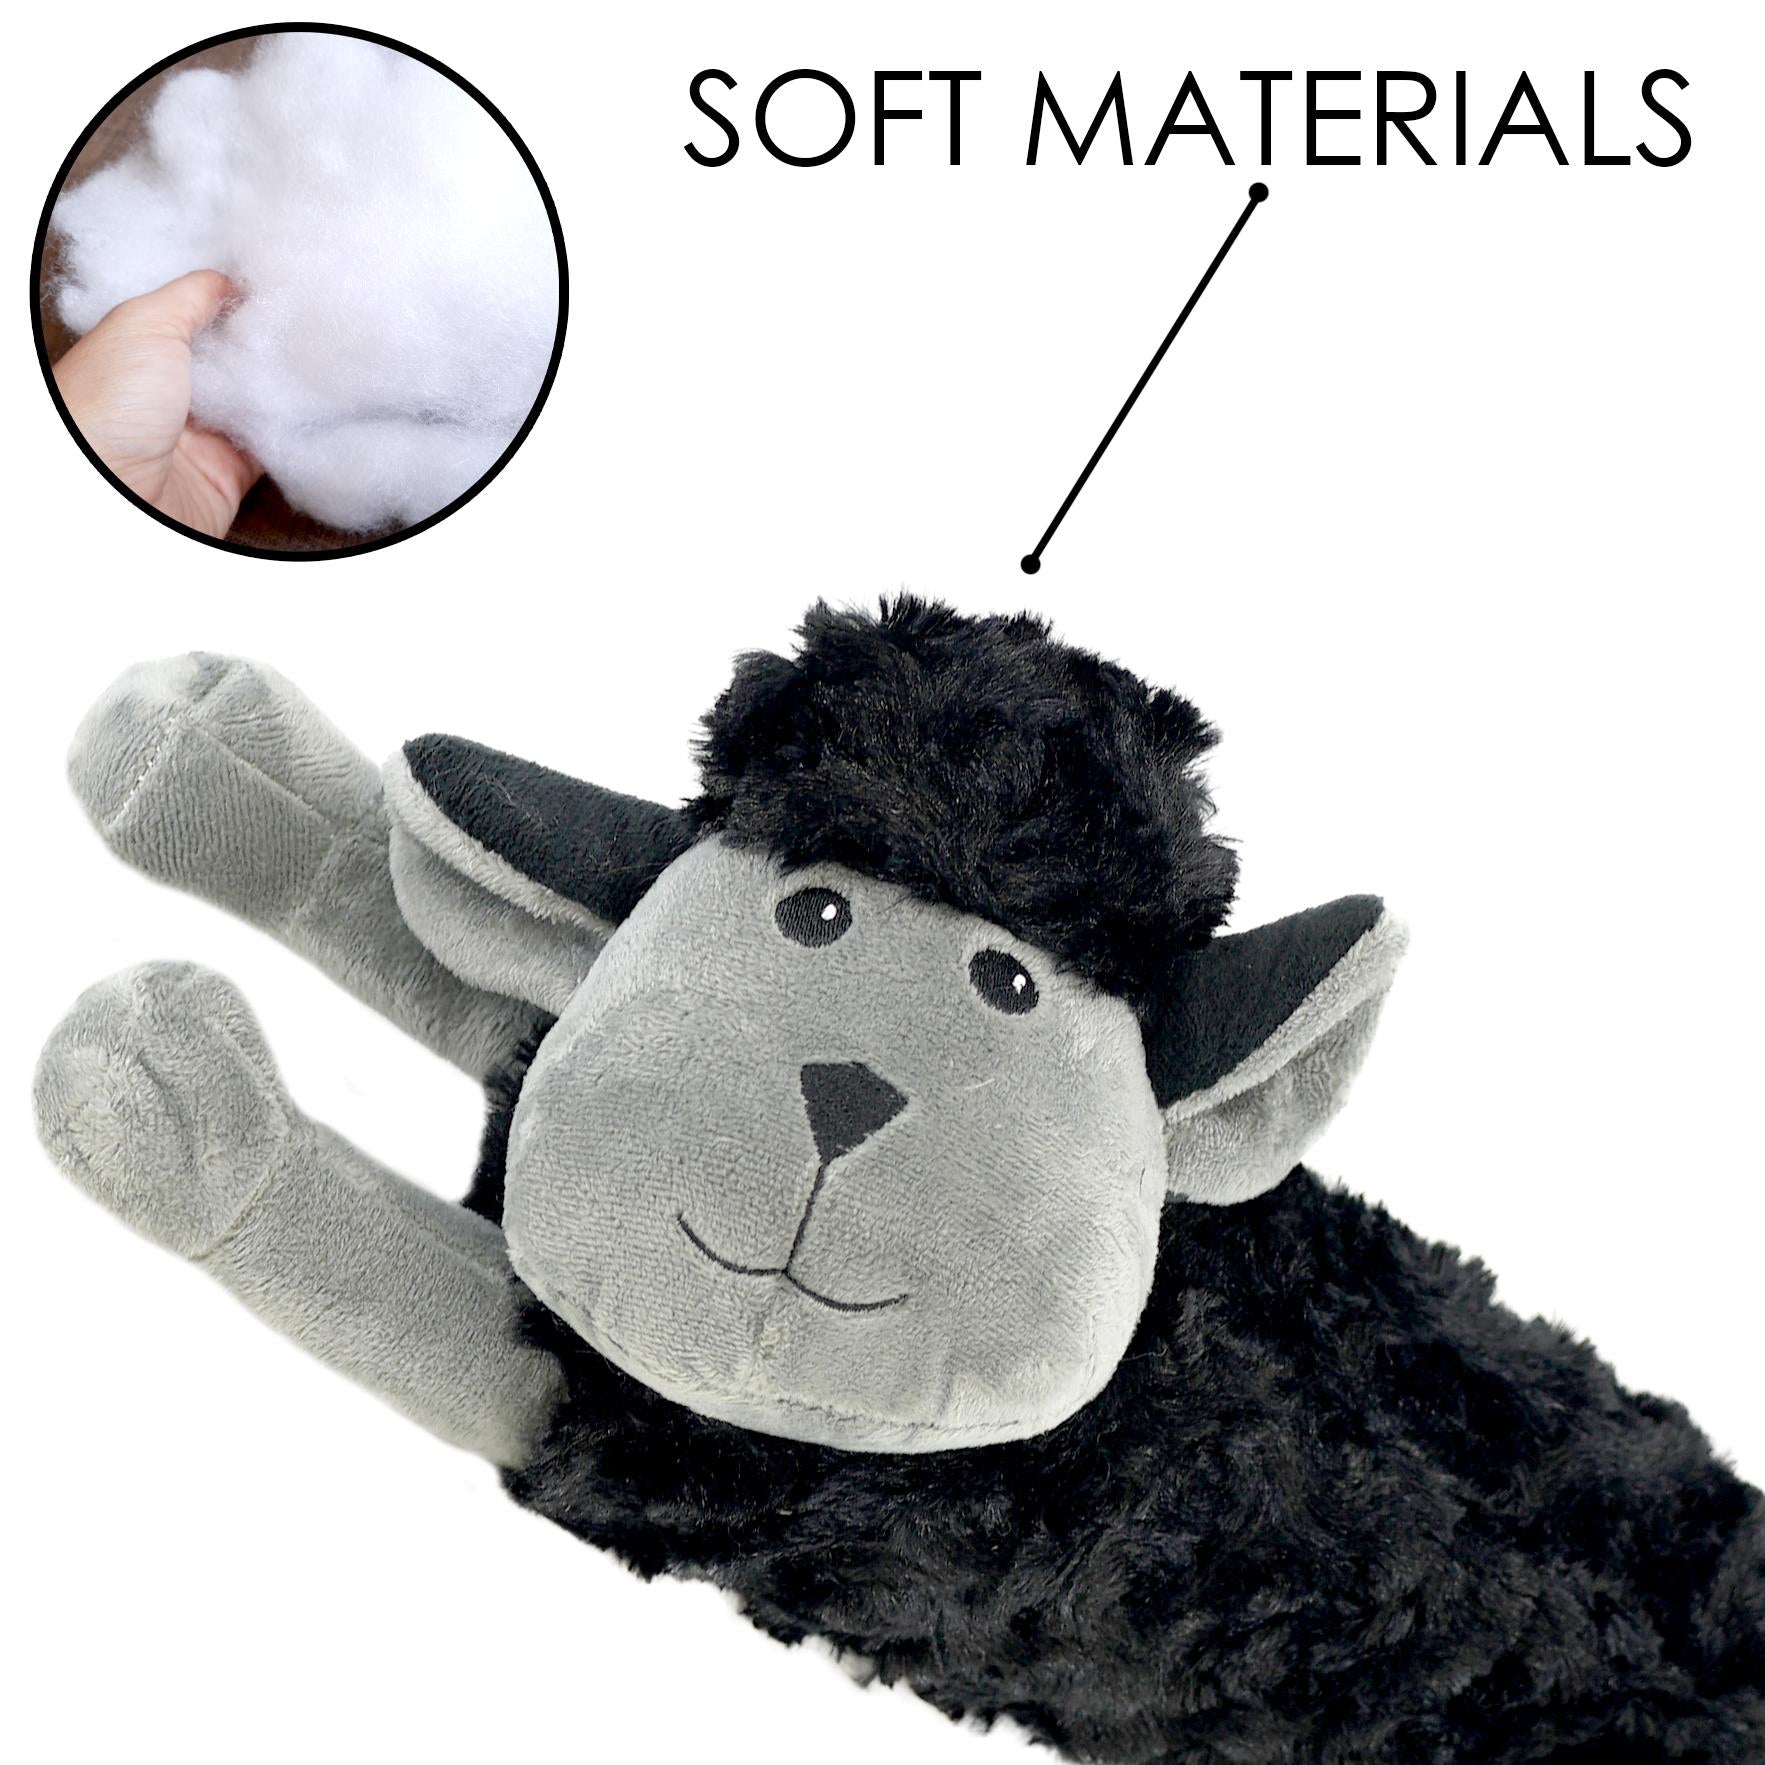 Novelty Black Sheep Excluder by The Magic Toy Shop - UKBuyZone